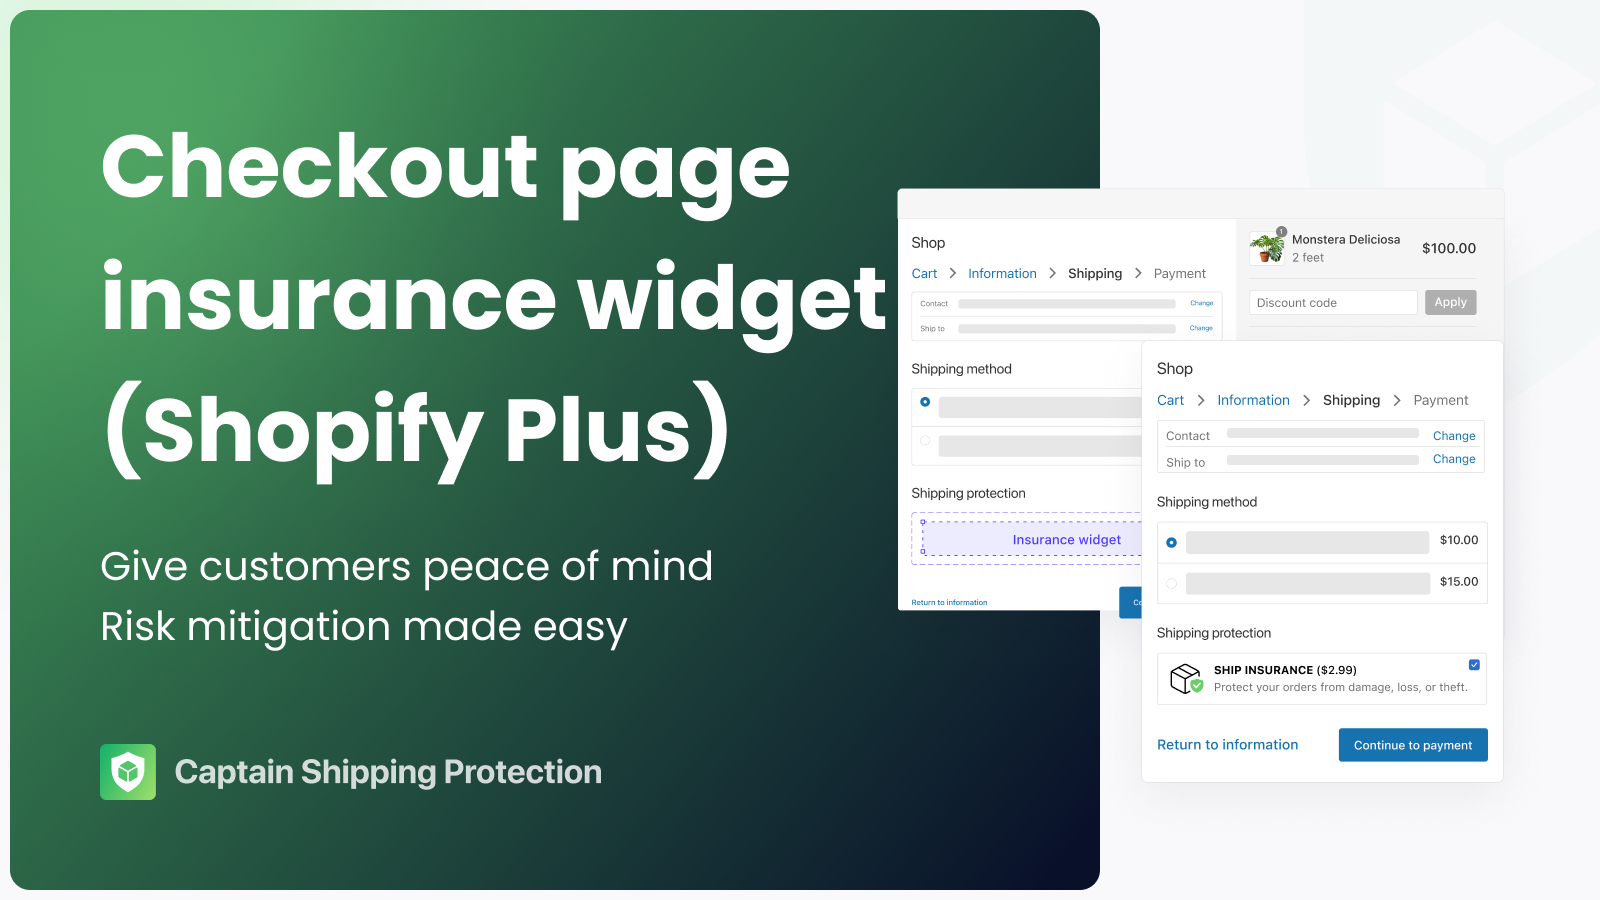 Captain Shipping Protection Checkout Page for Shopify Plus